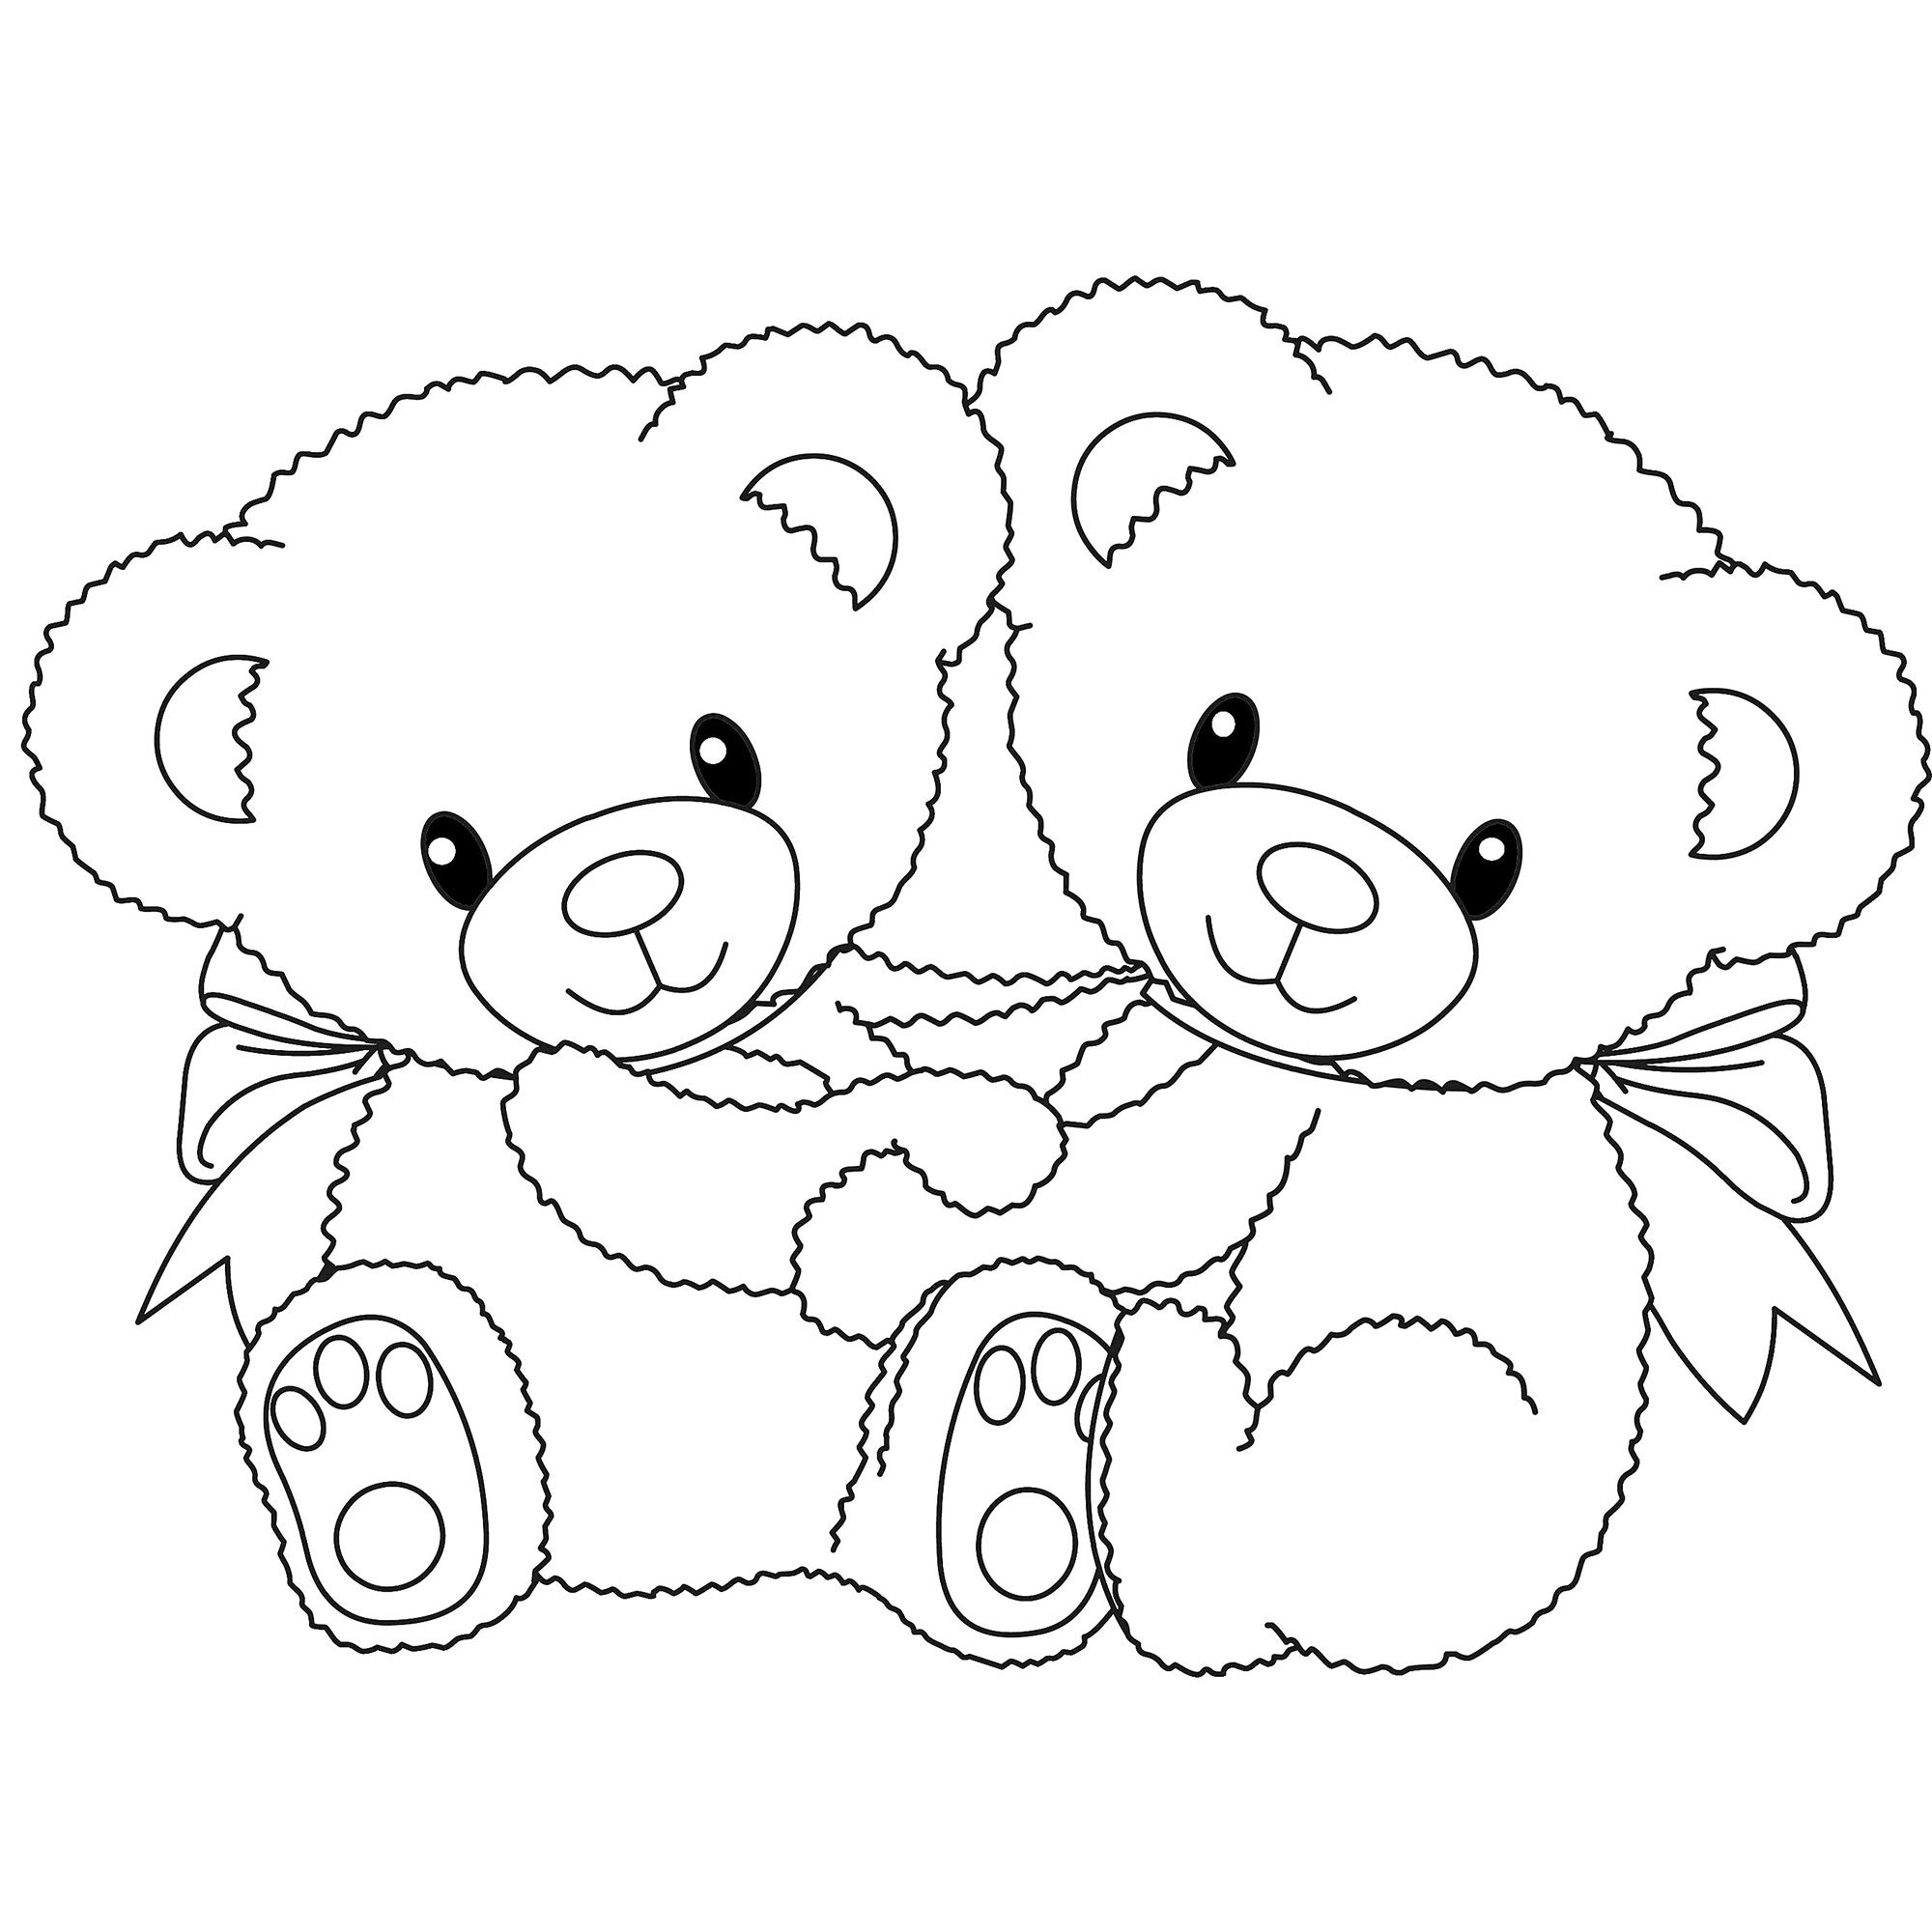 Coloring pages Bears | Coloring ...